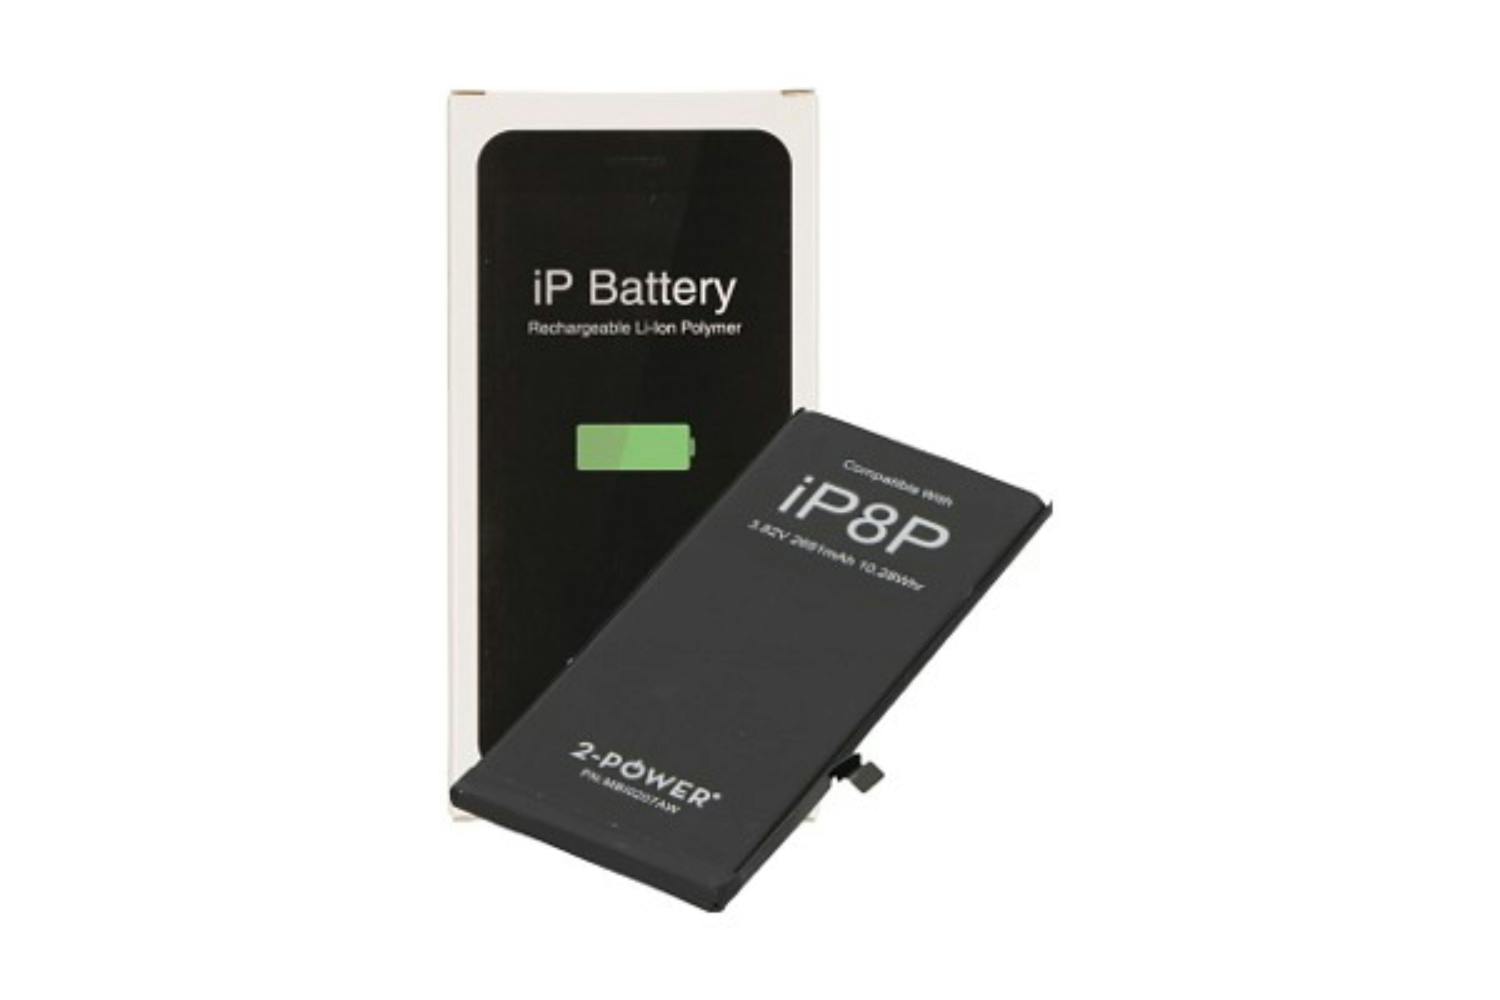 2-Power MBI0207AW 2691mAh Replacement iPhone Battery